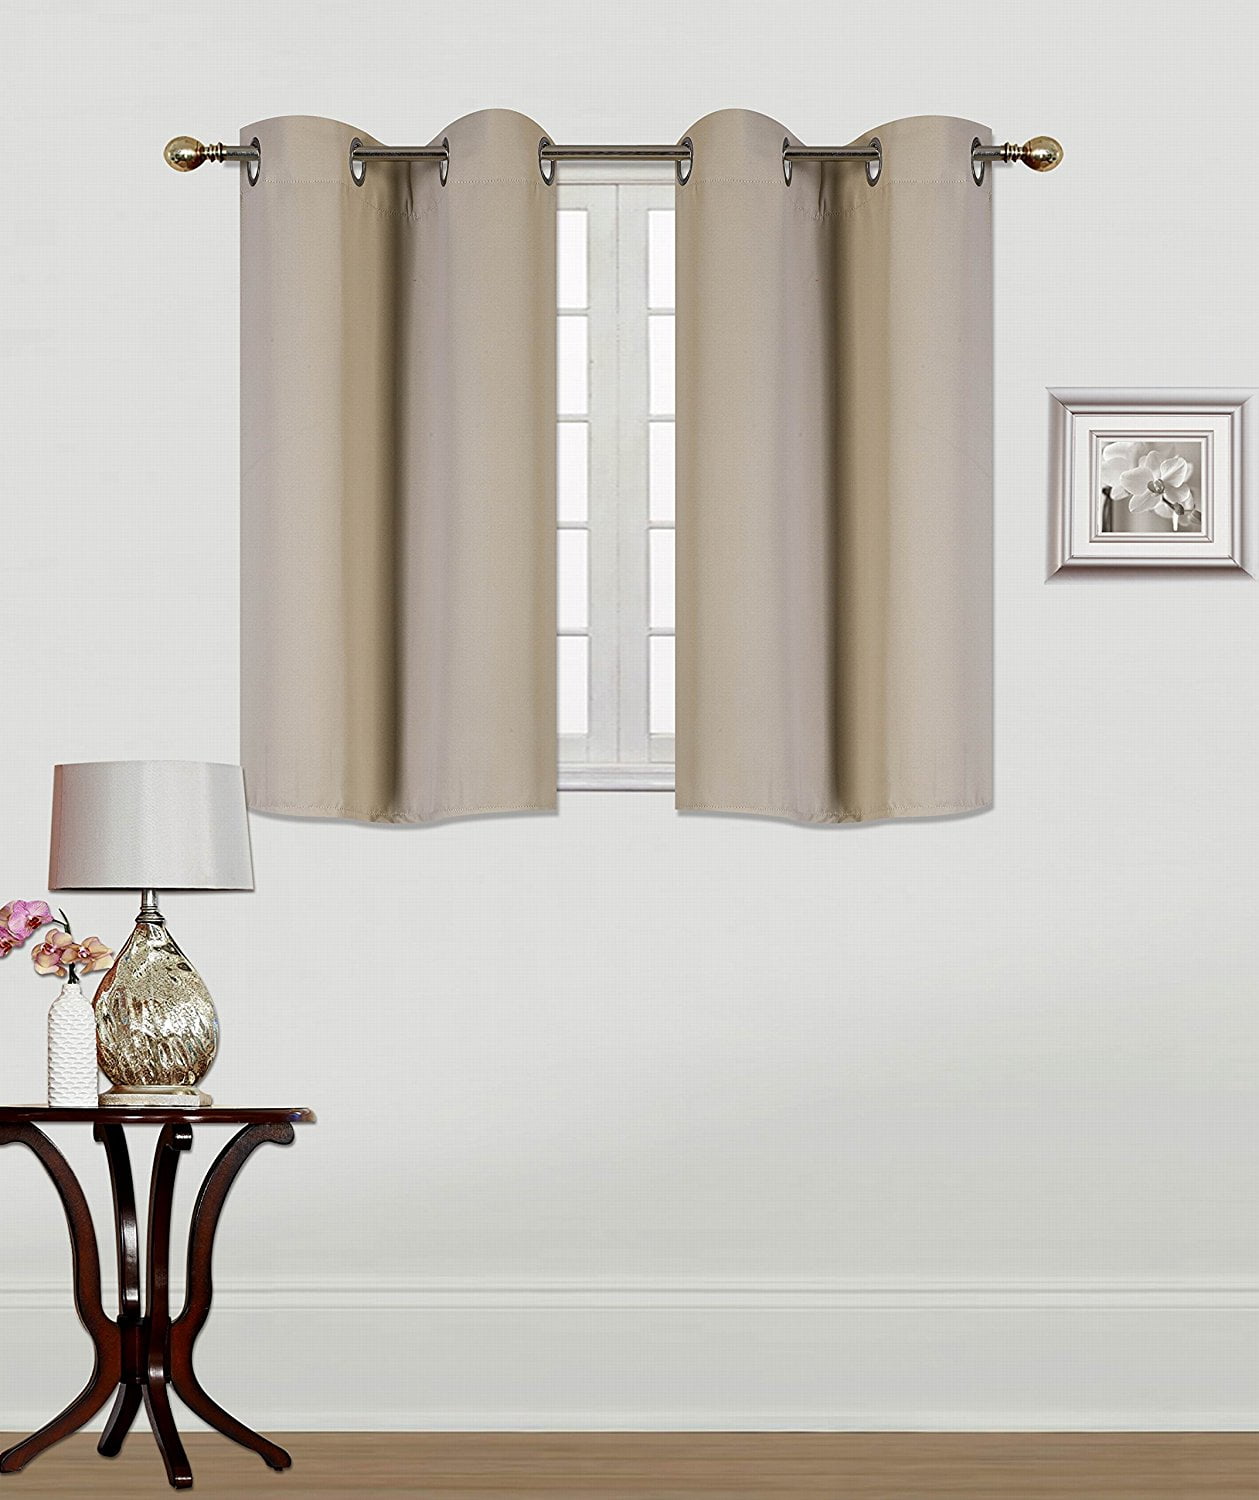 INSULATED FOAM LINED panel BLACKOUT GROMMET WINDOW CURTAIN 1PC TAUPE TAN 